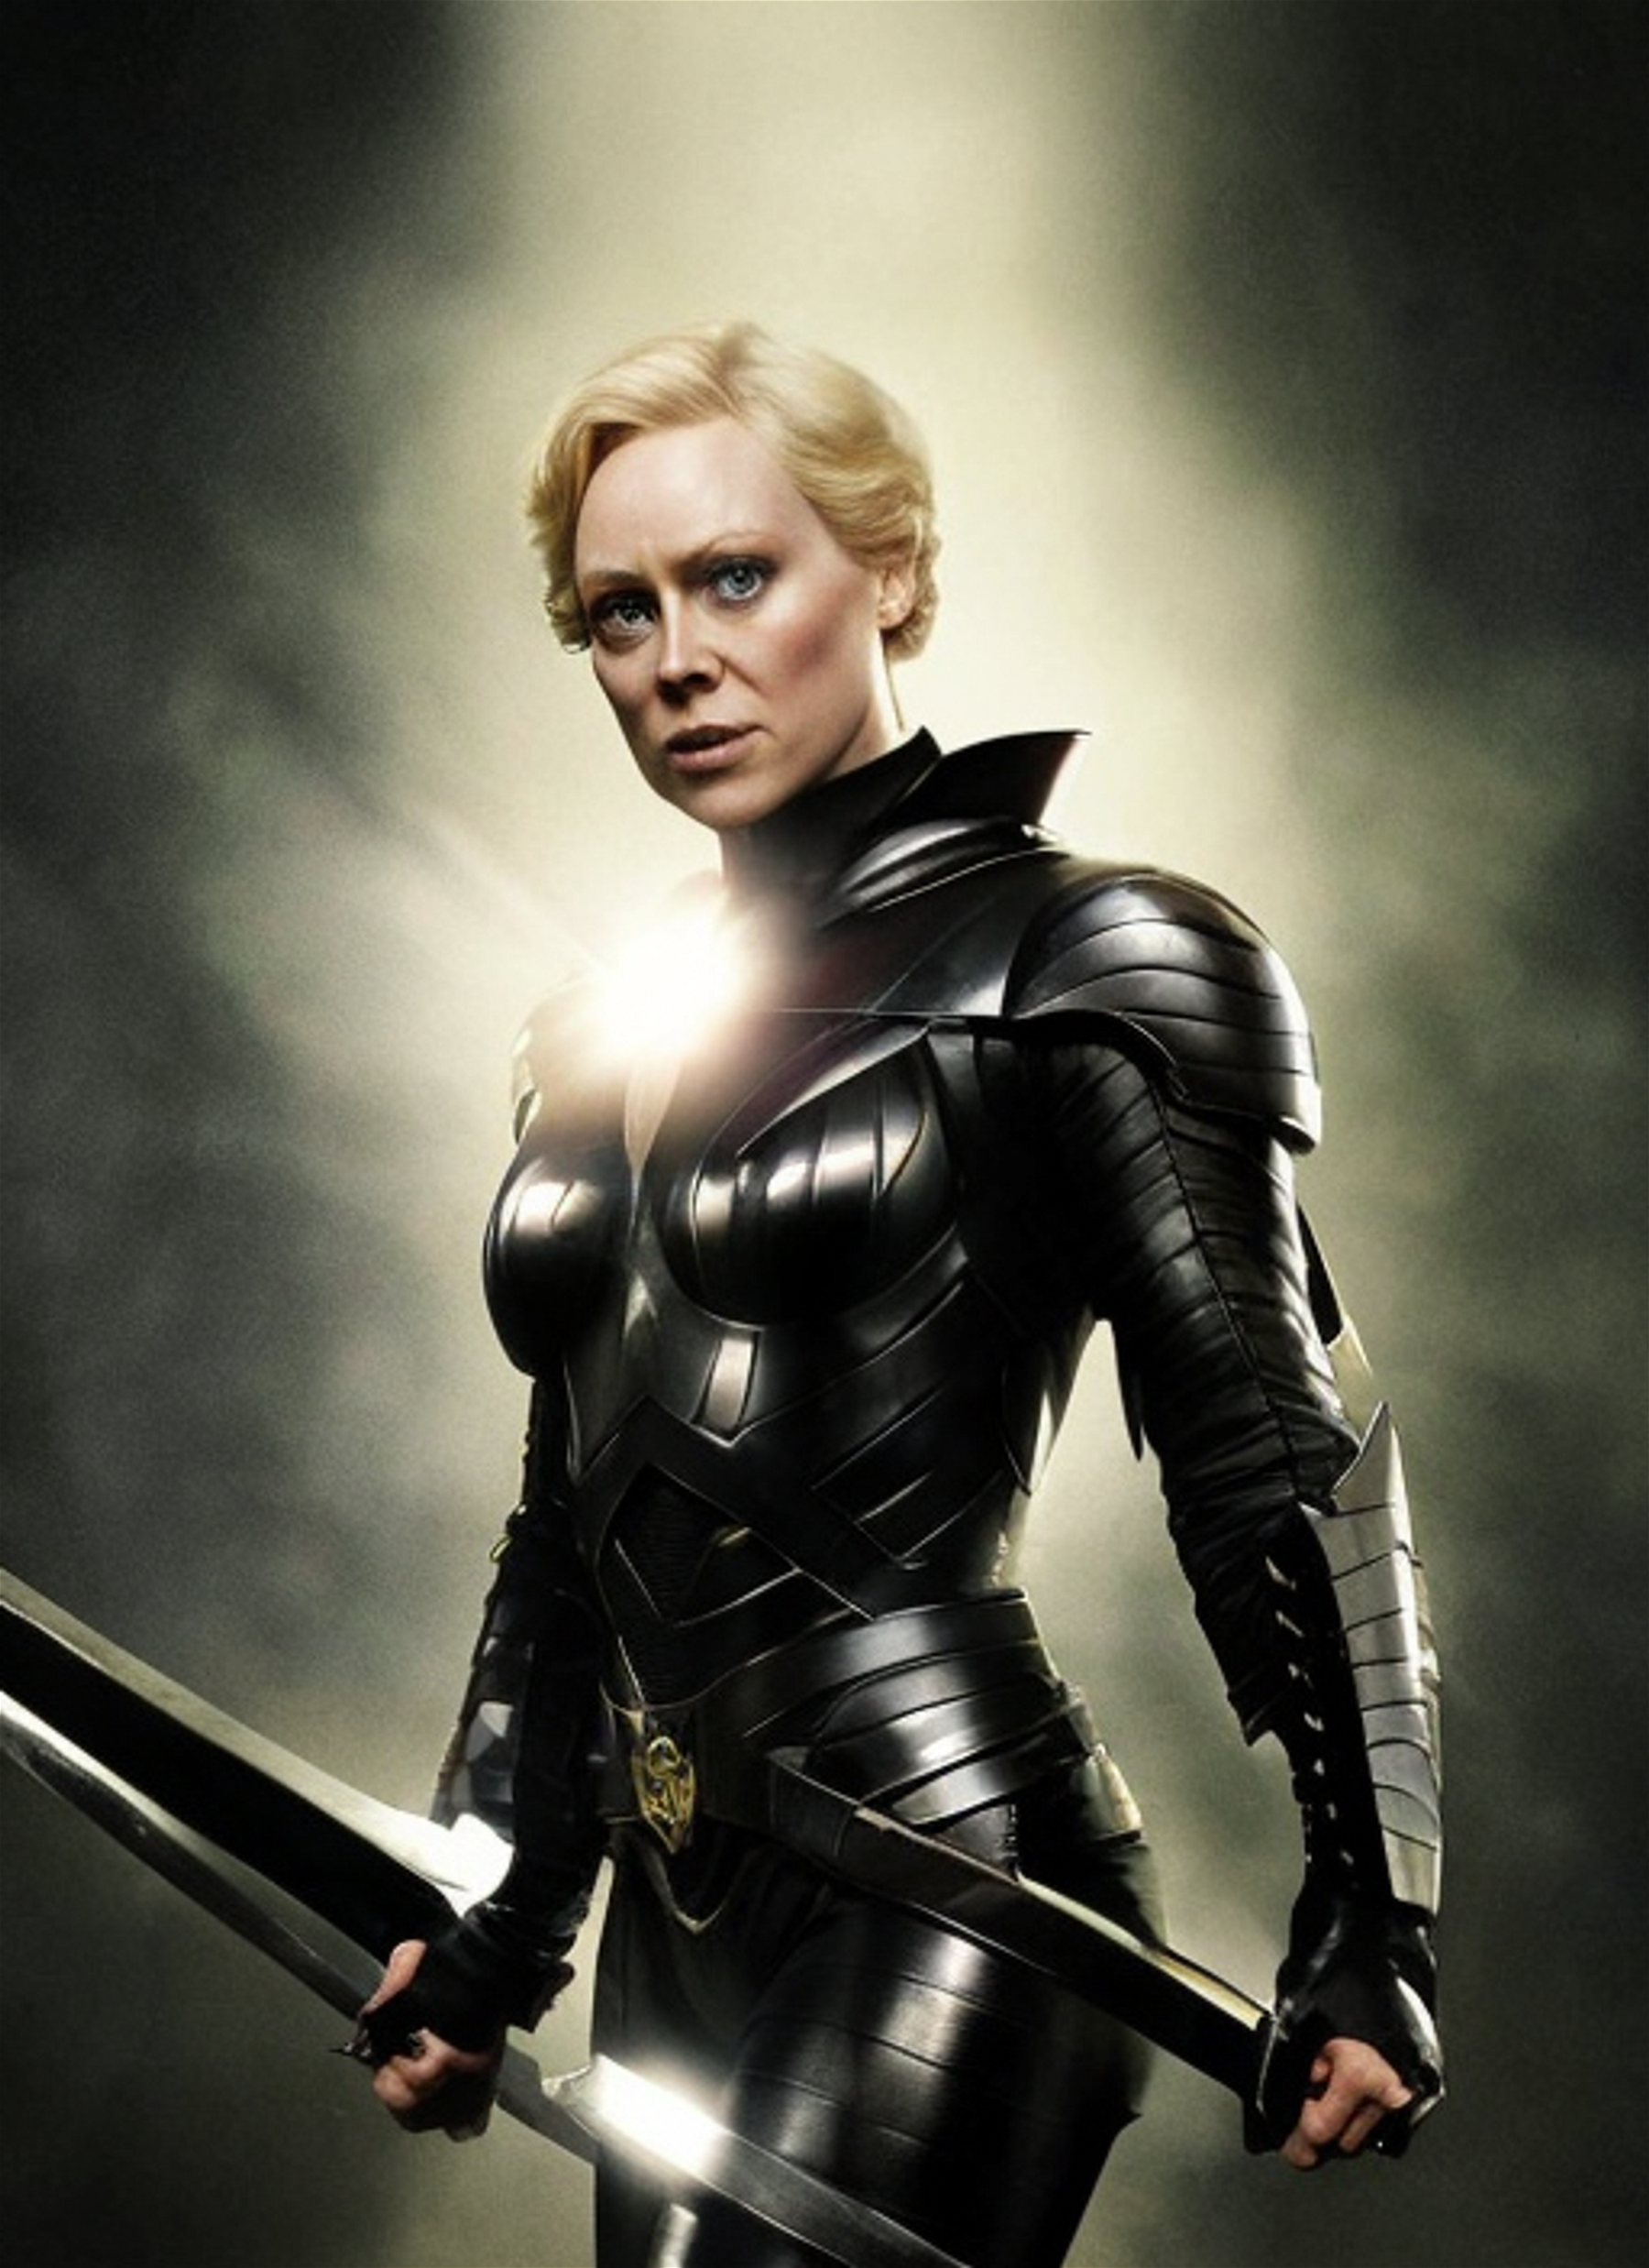 A photorealistic full body portrait of Gwendoline Christie in a fierce and powerful pose, inspired by the work of Alex Ross and David Finch, with bold lines and sharp details, in a dark and moody setting.